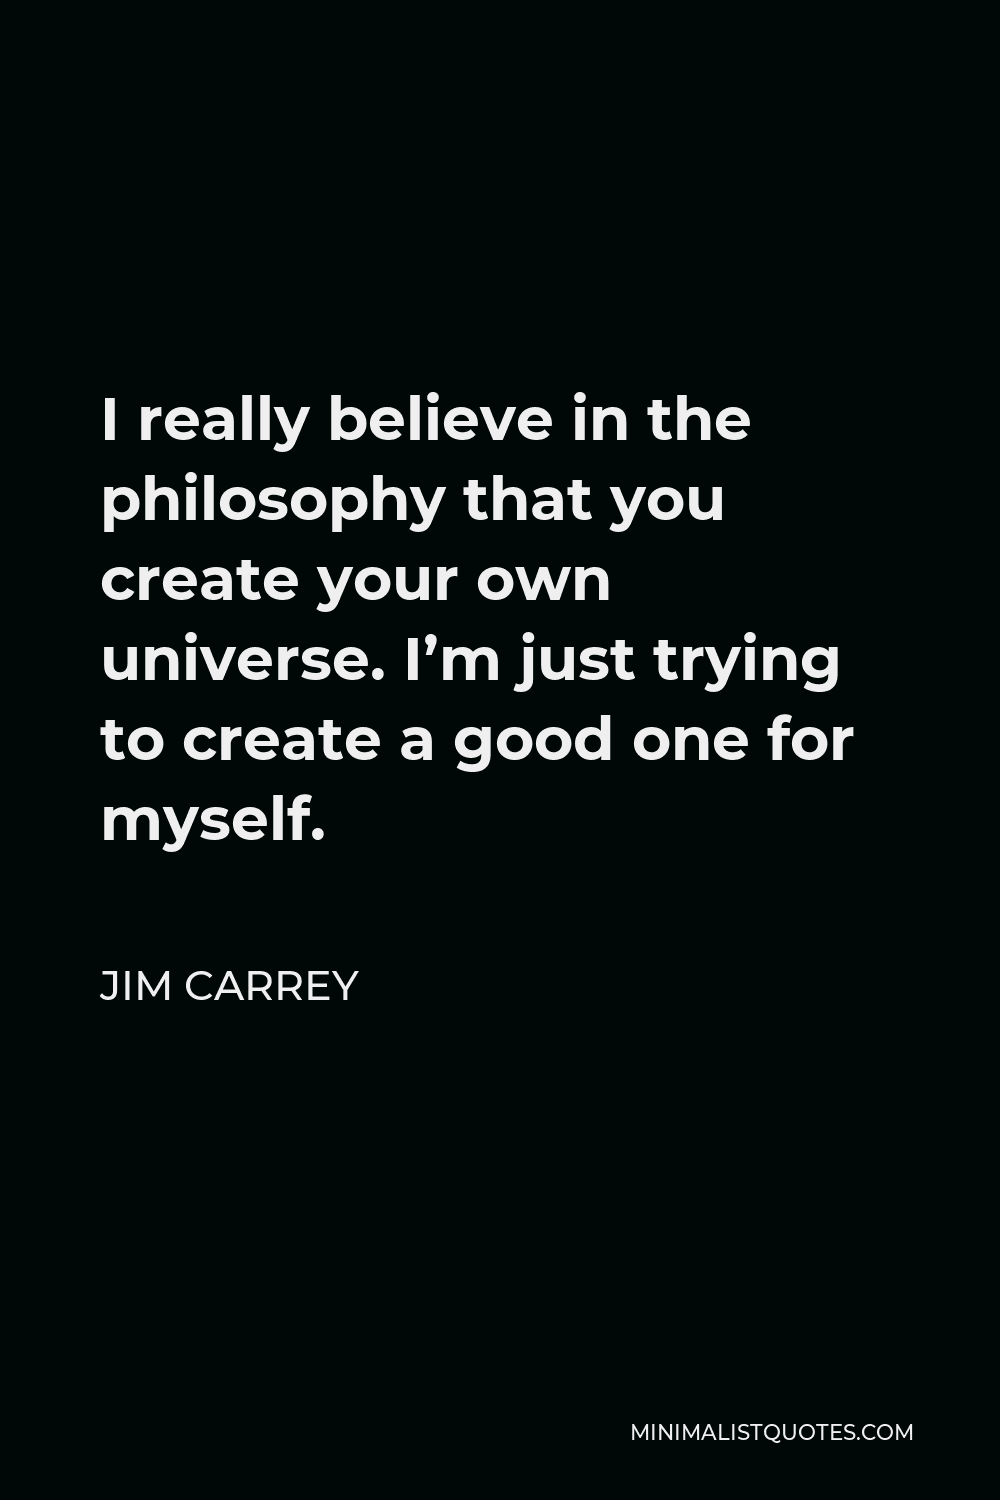 Jim Carrey Quote - I really believe in the philosophy that you create your own universe. I’m just trying to create a good one for myself.